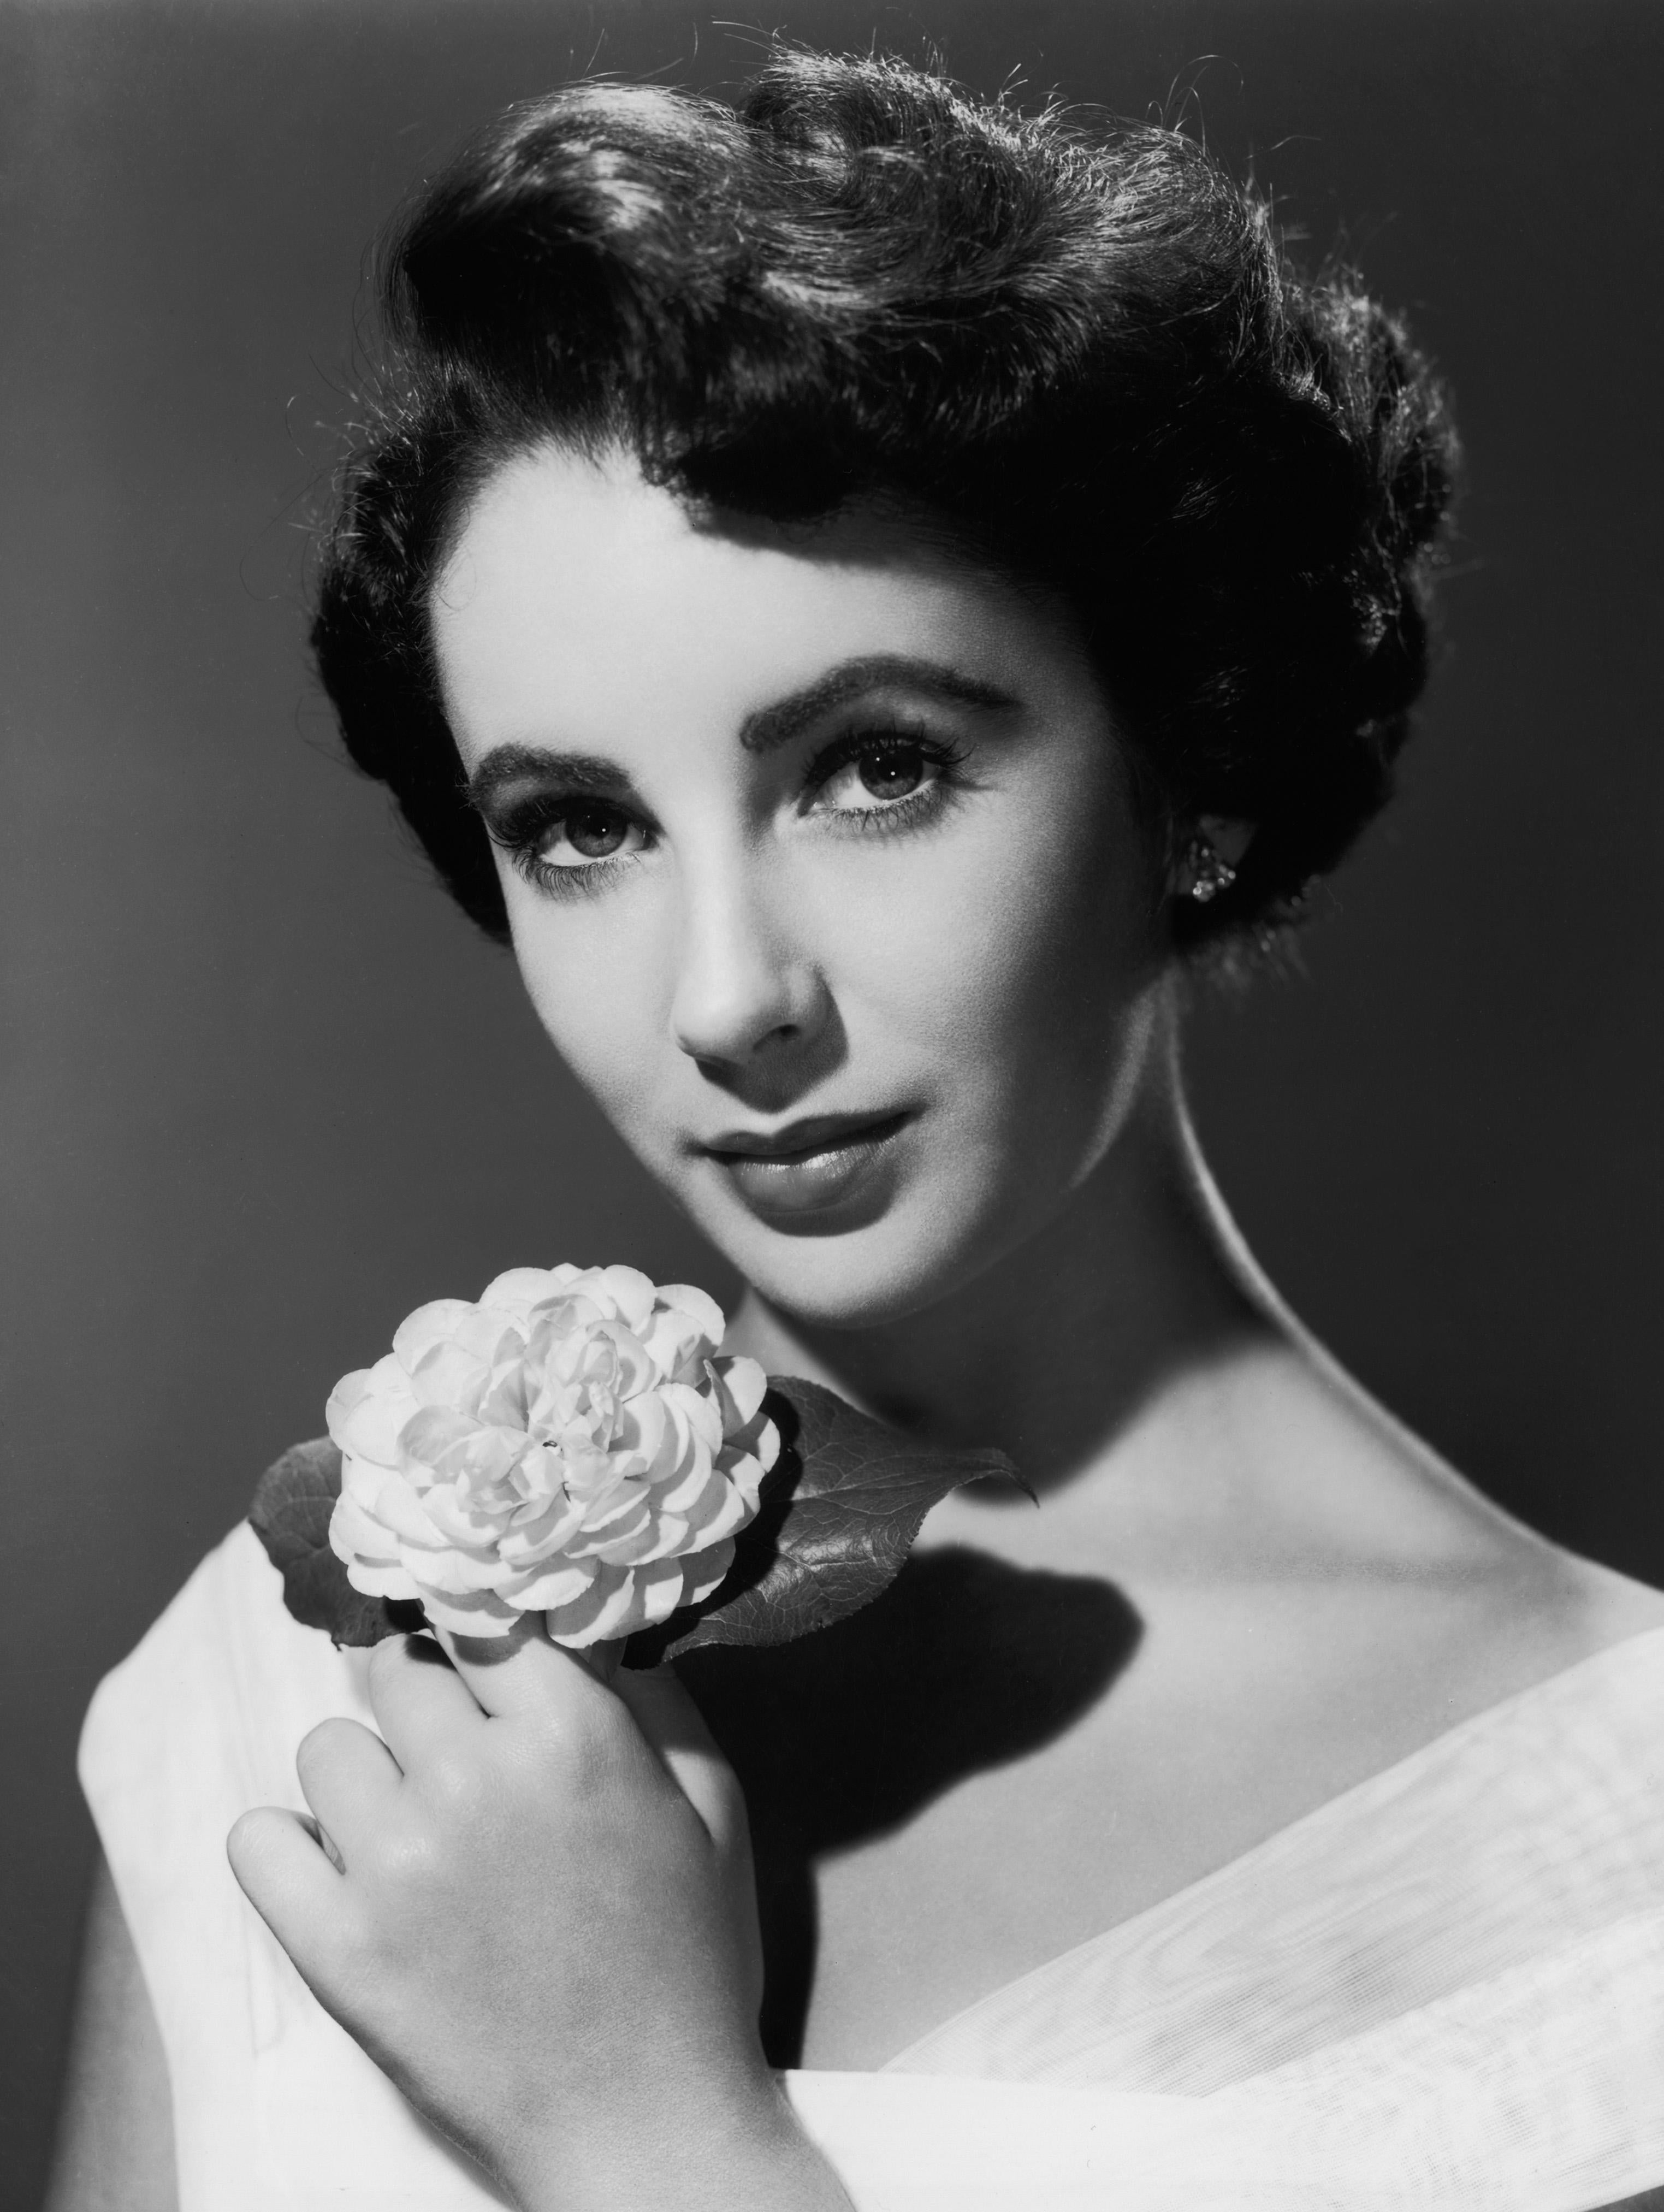 Unknown Black and White Photograph - Elizabeth Taylor Posed with Flower Globe Photos Fine Art Print